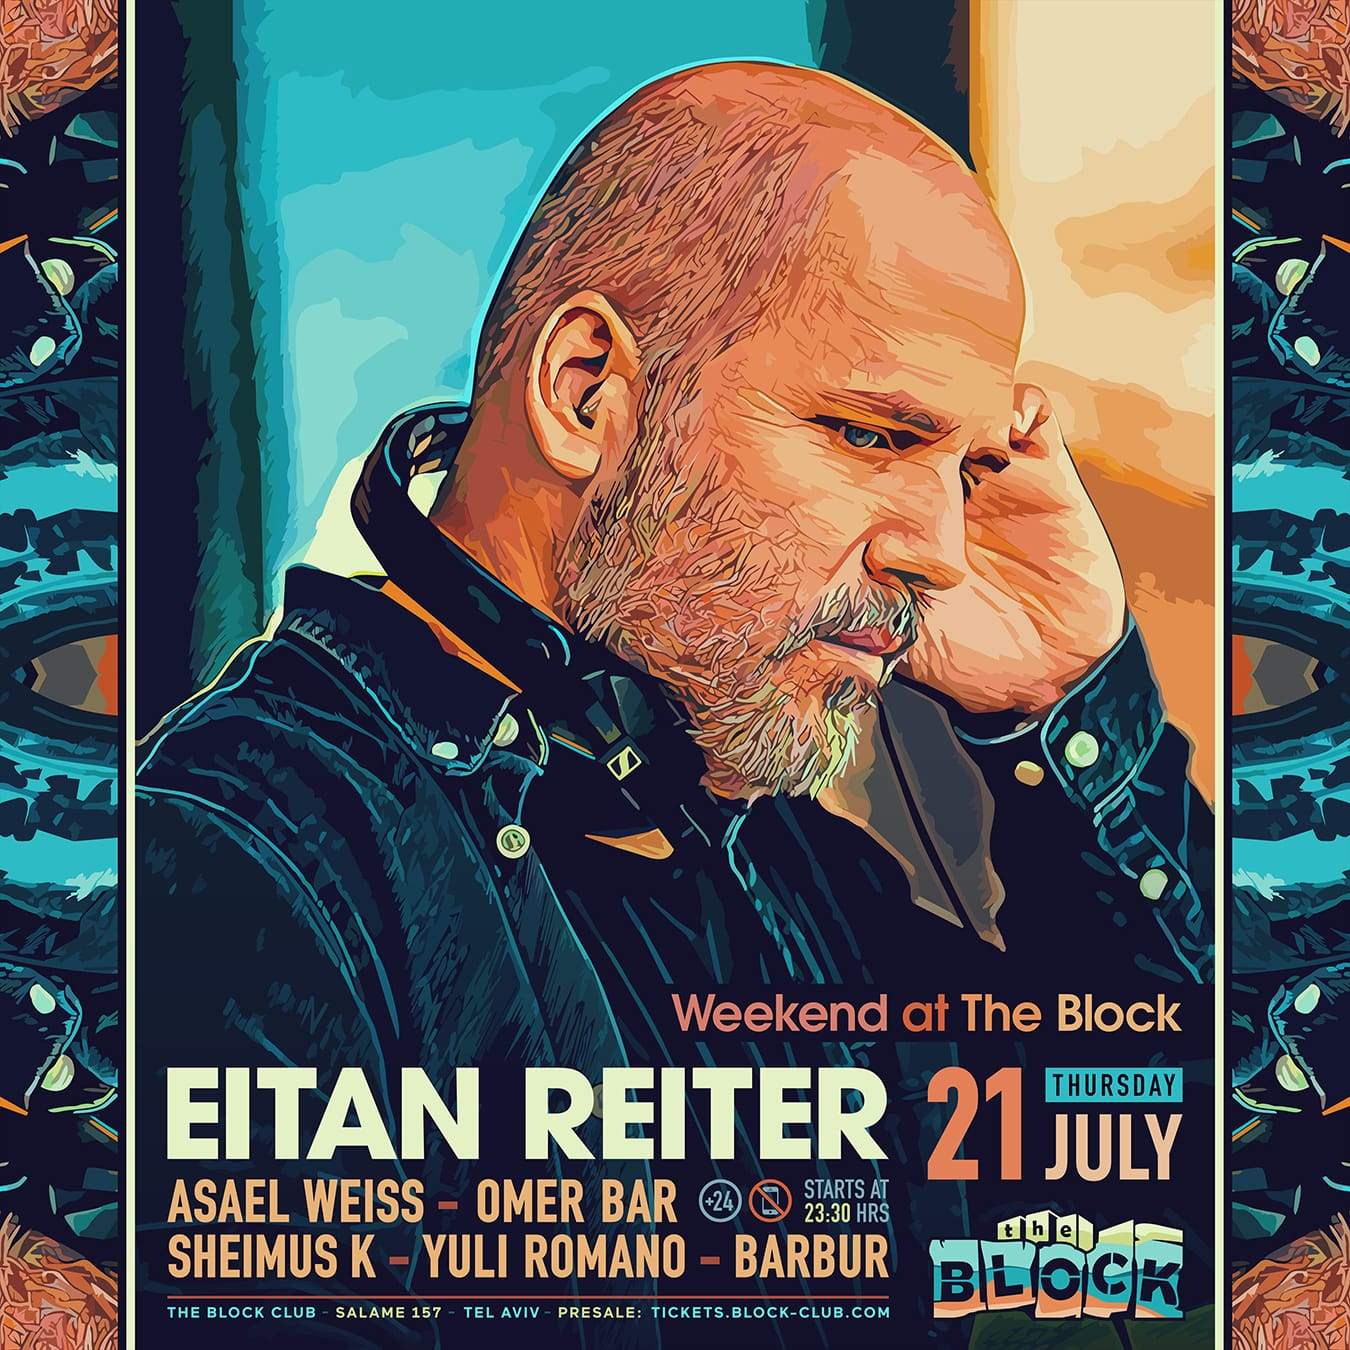 Thursday with Eitan Reiter and friends - フライヤー表